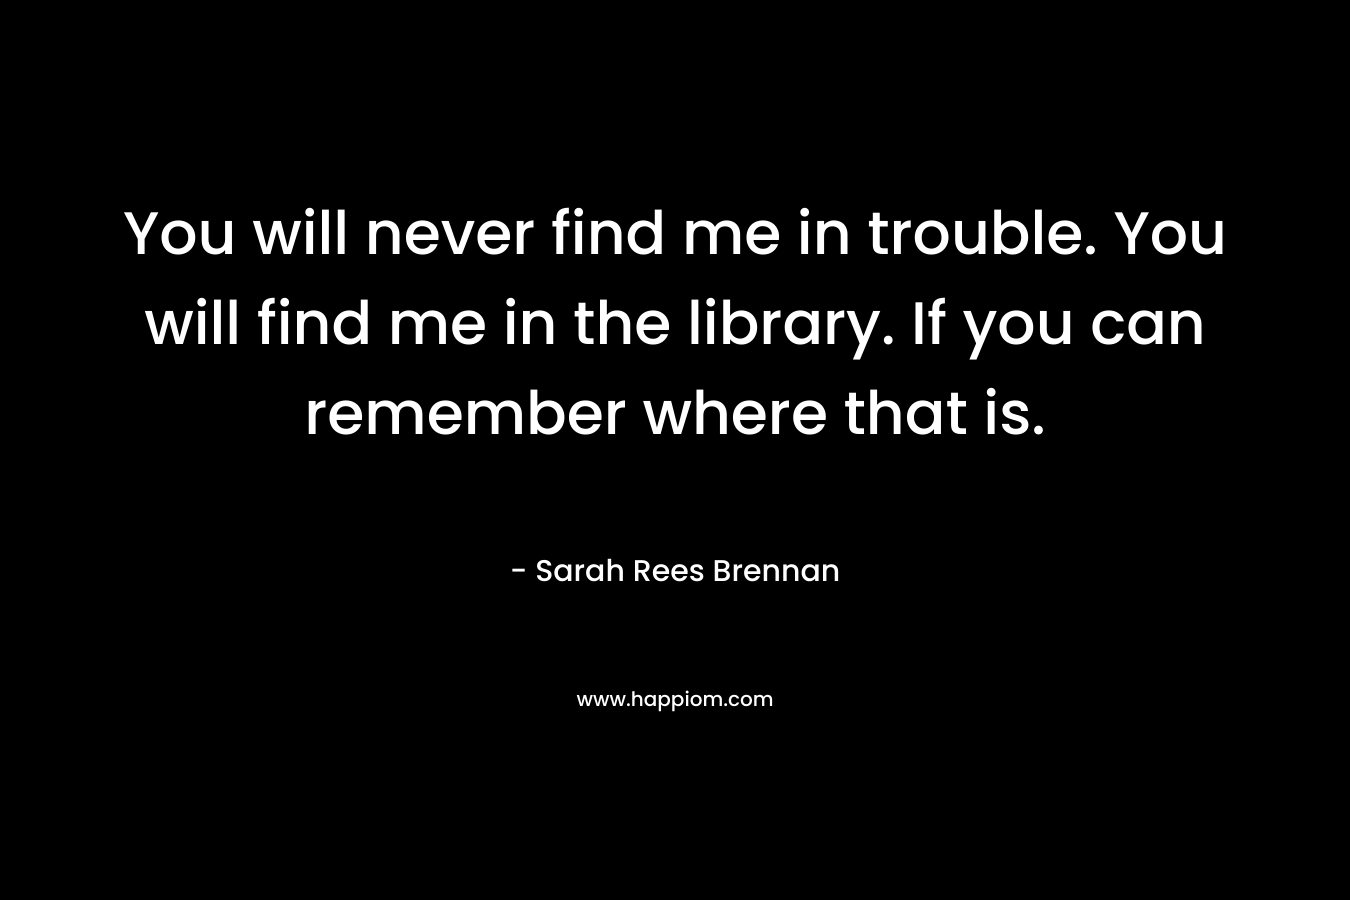 You will never find me in trouble. You will find me in the library. If you can remember where that is. – Sarah Rees Brennan